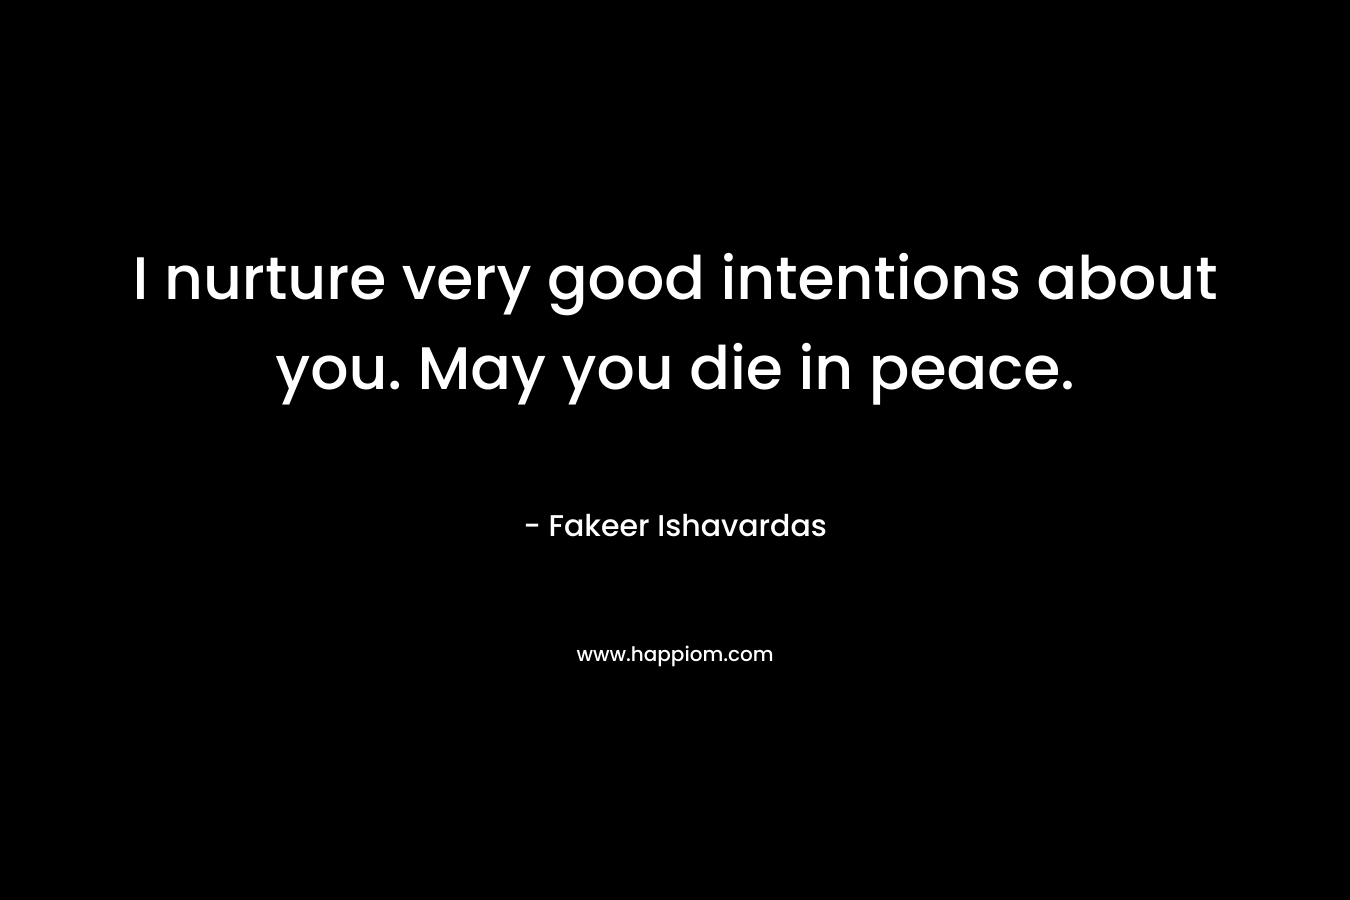 I nurture very good intentions about you. May you die in peace. – Fakeer Ishavardas